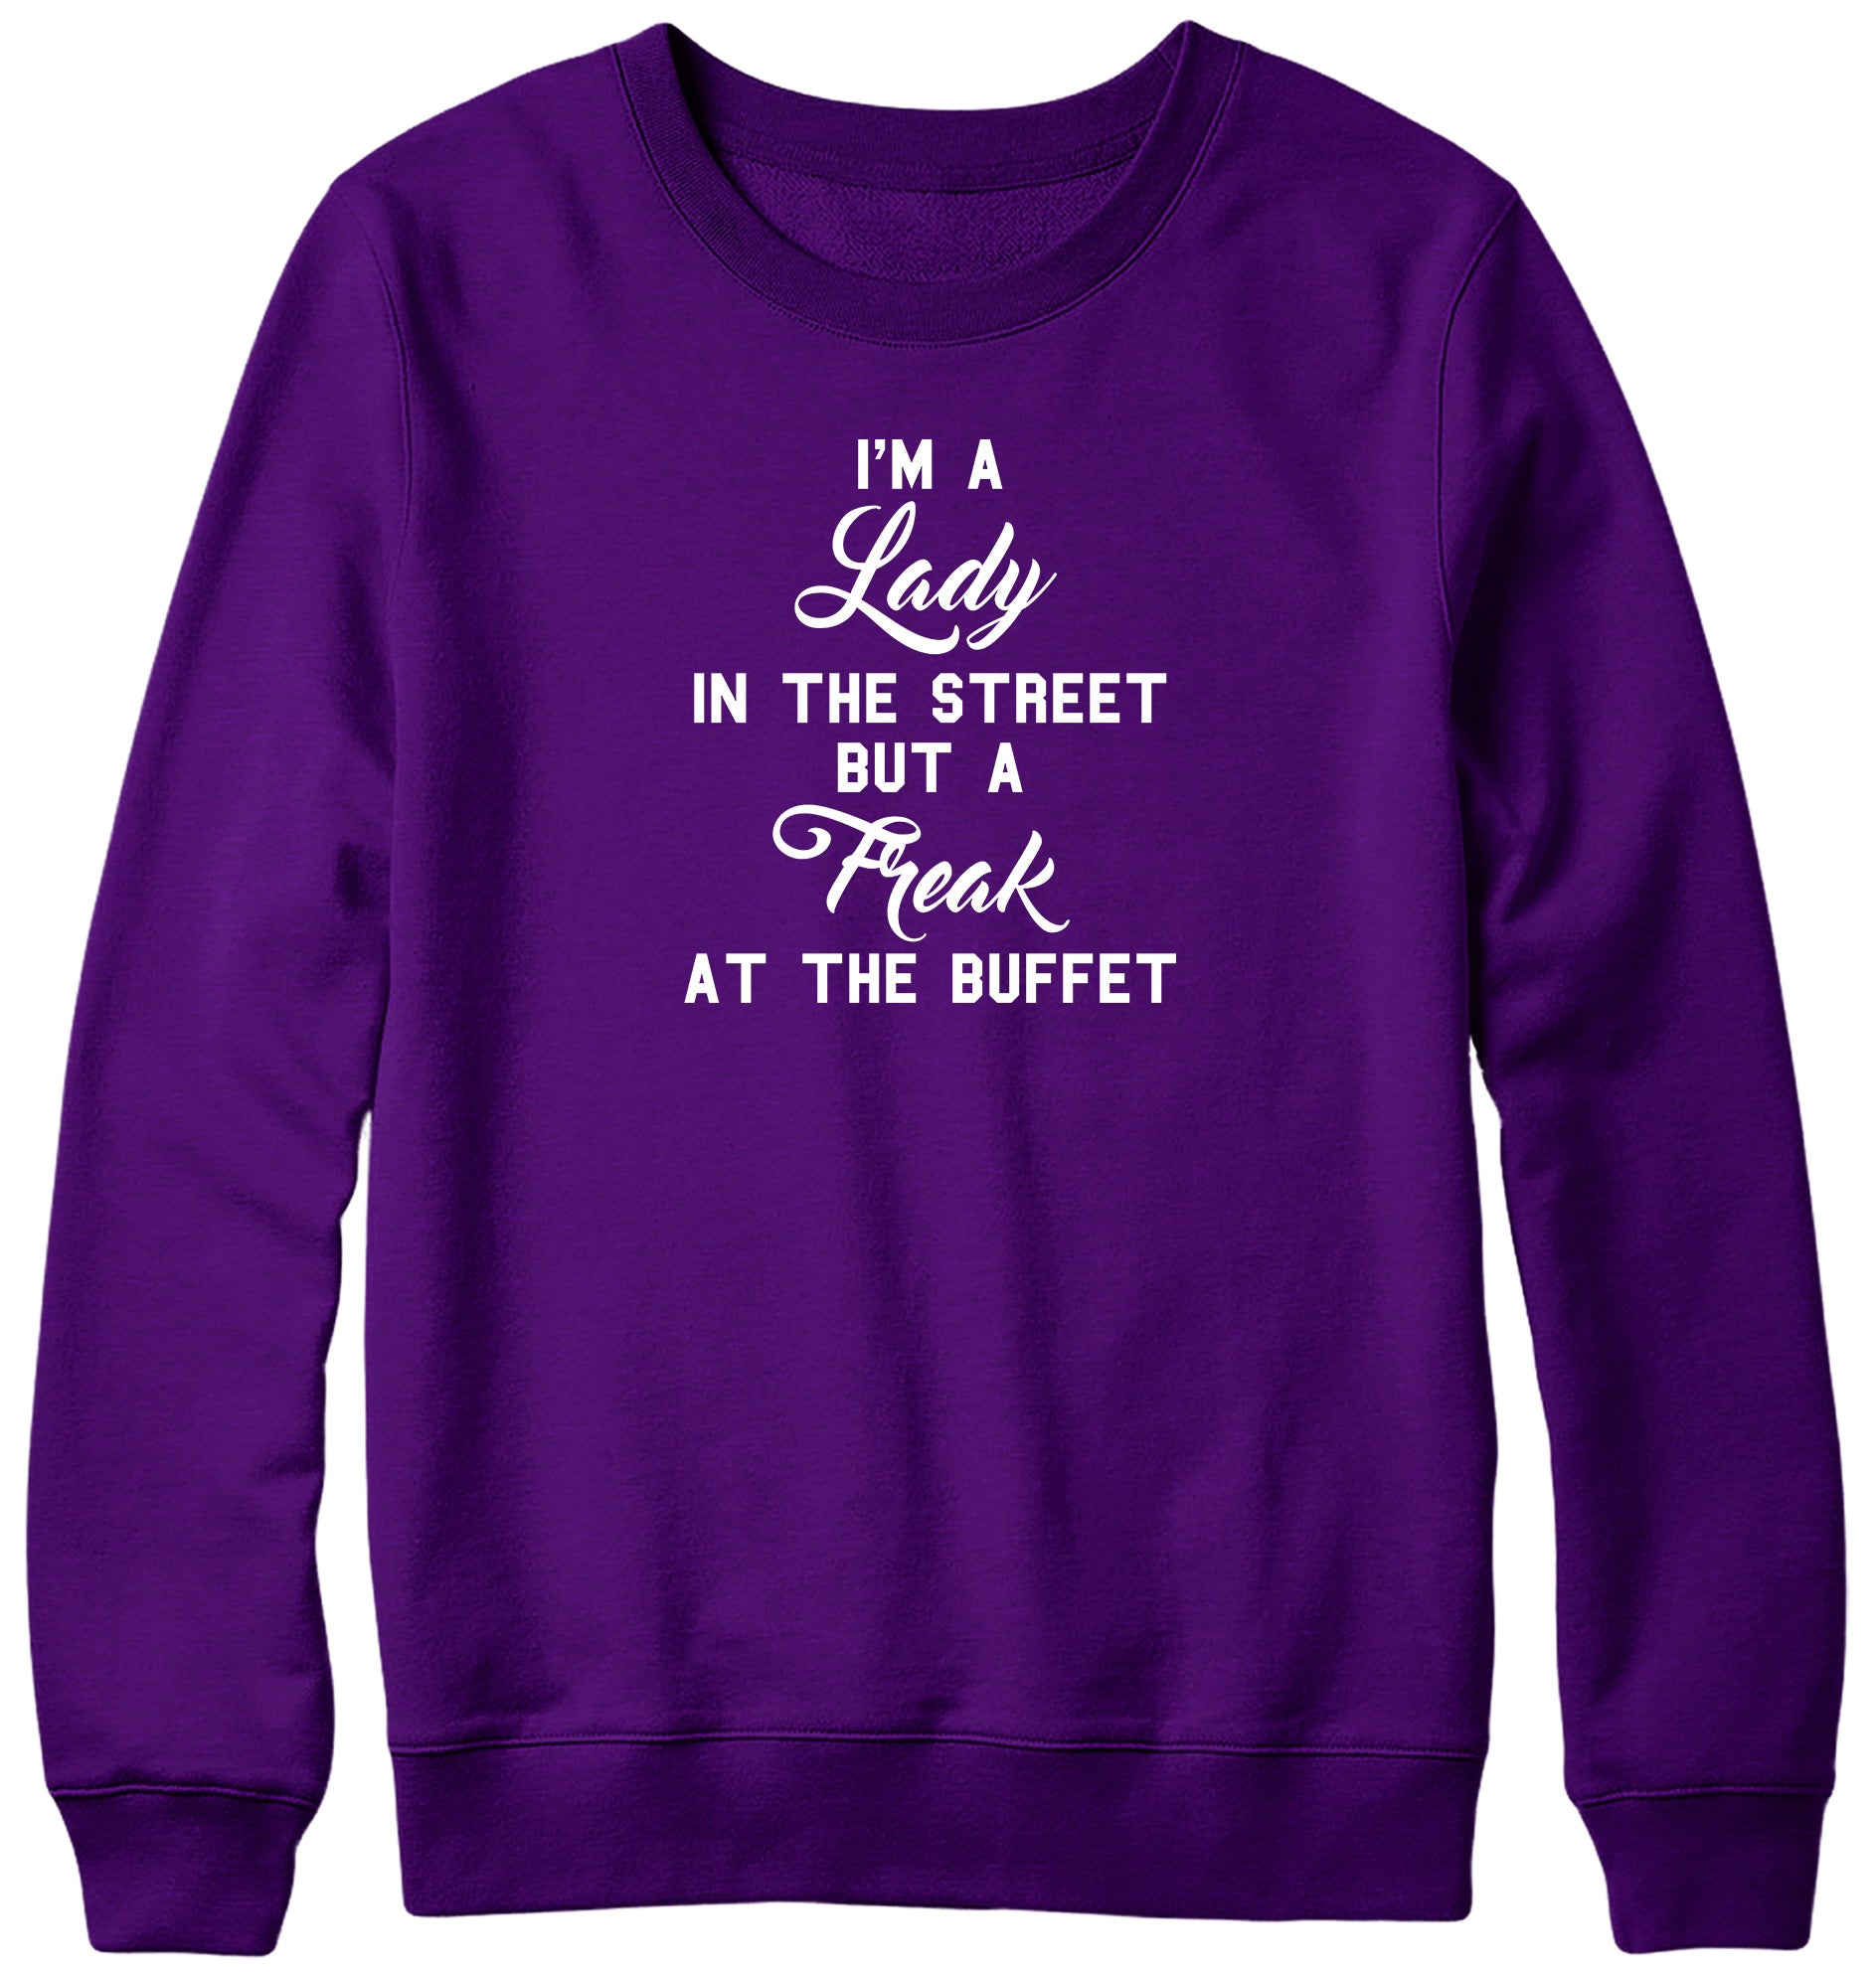 I'M A LADY IN THE STREET BUT A FREAK AT THE BUFFET MENS LADIES WOMENS UNISEX SWEATSHIRT SWEATER